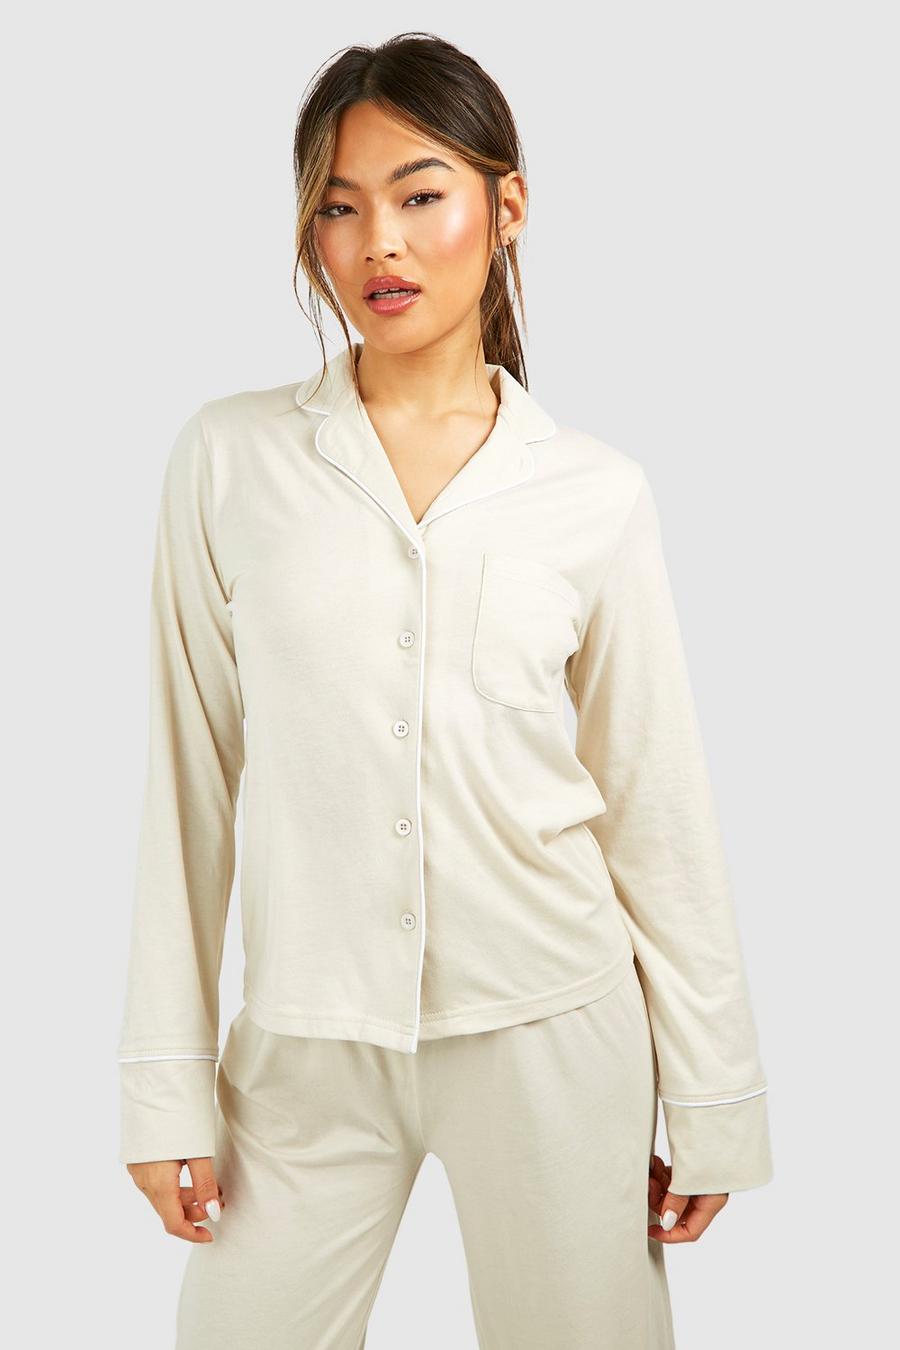 Sexy Women's Pajamas Onesies Women's Button-down Front Functional